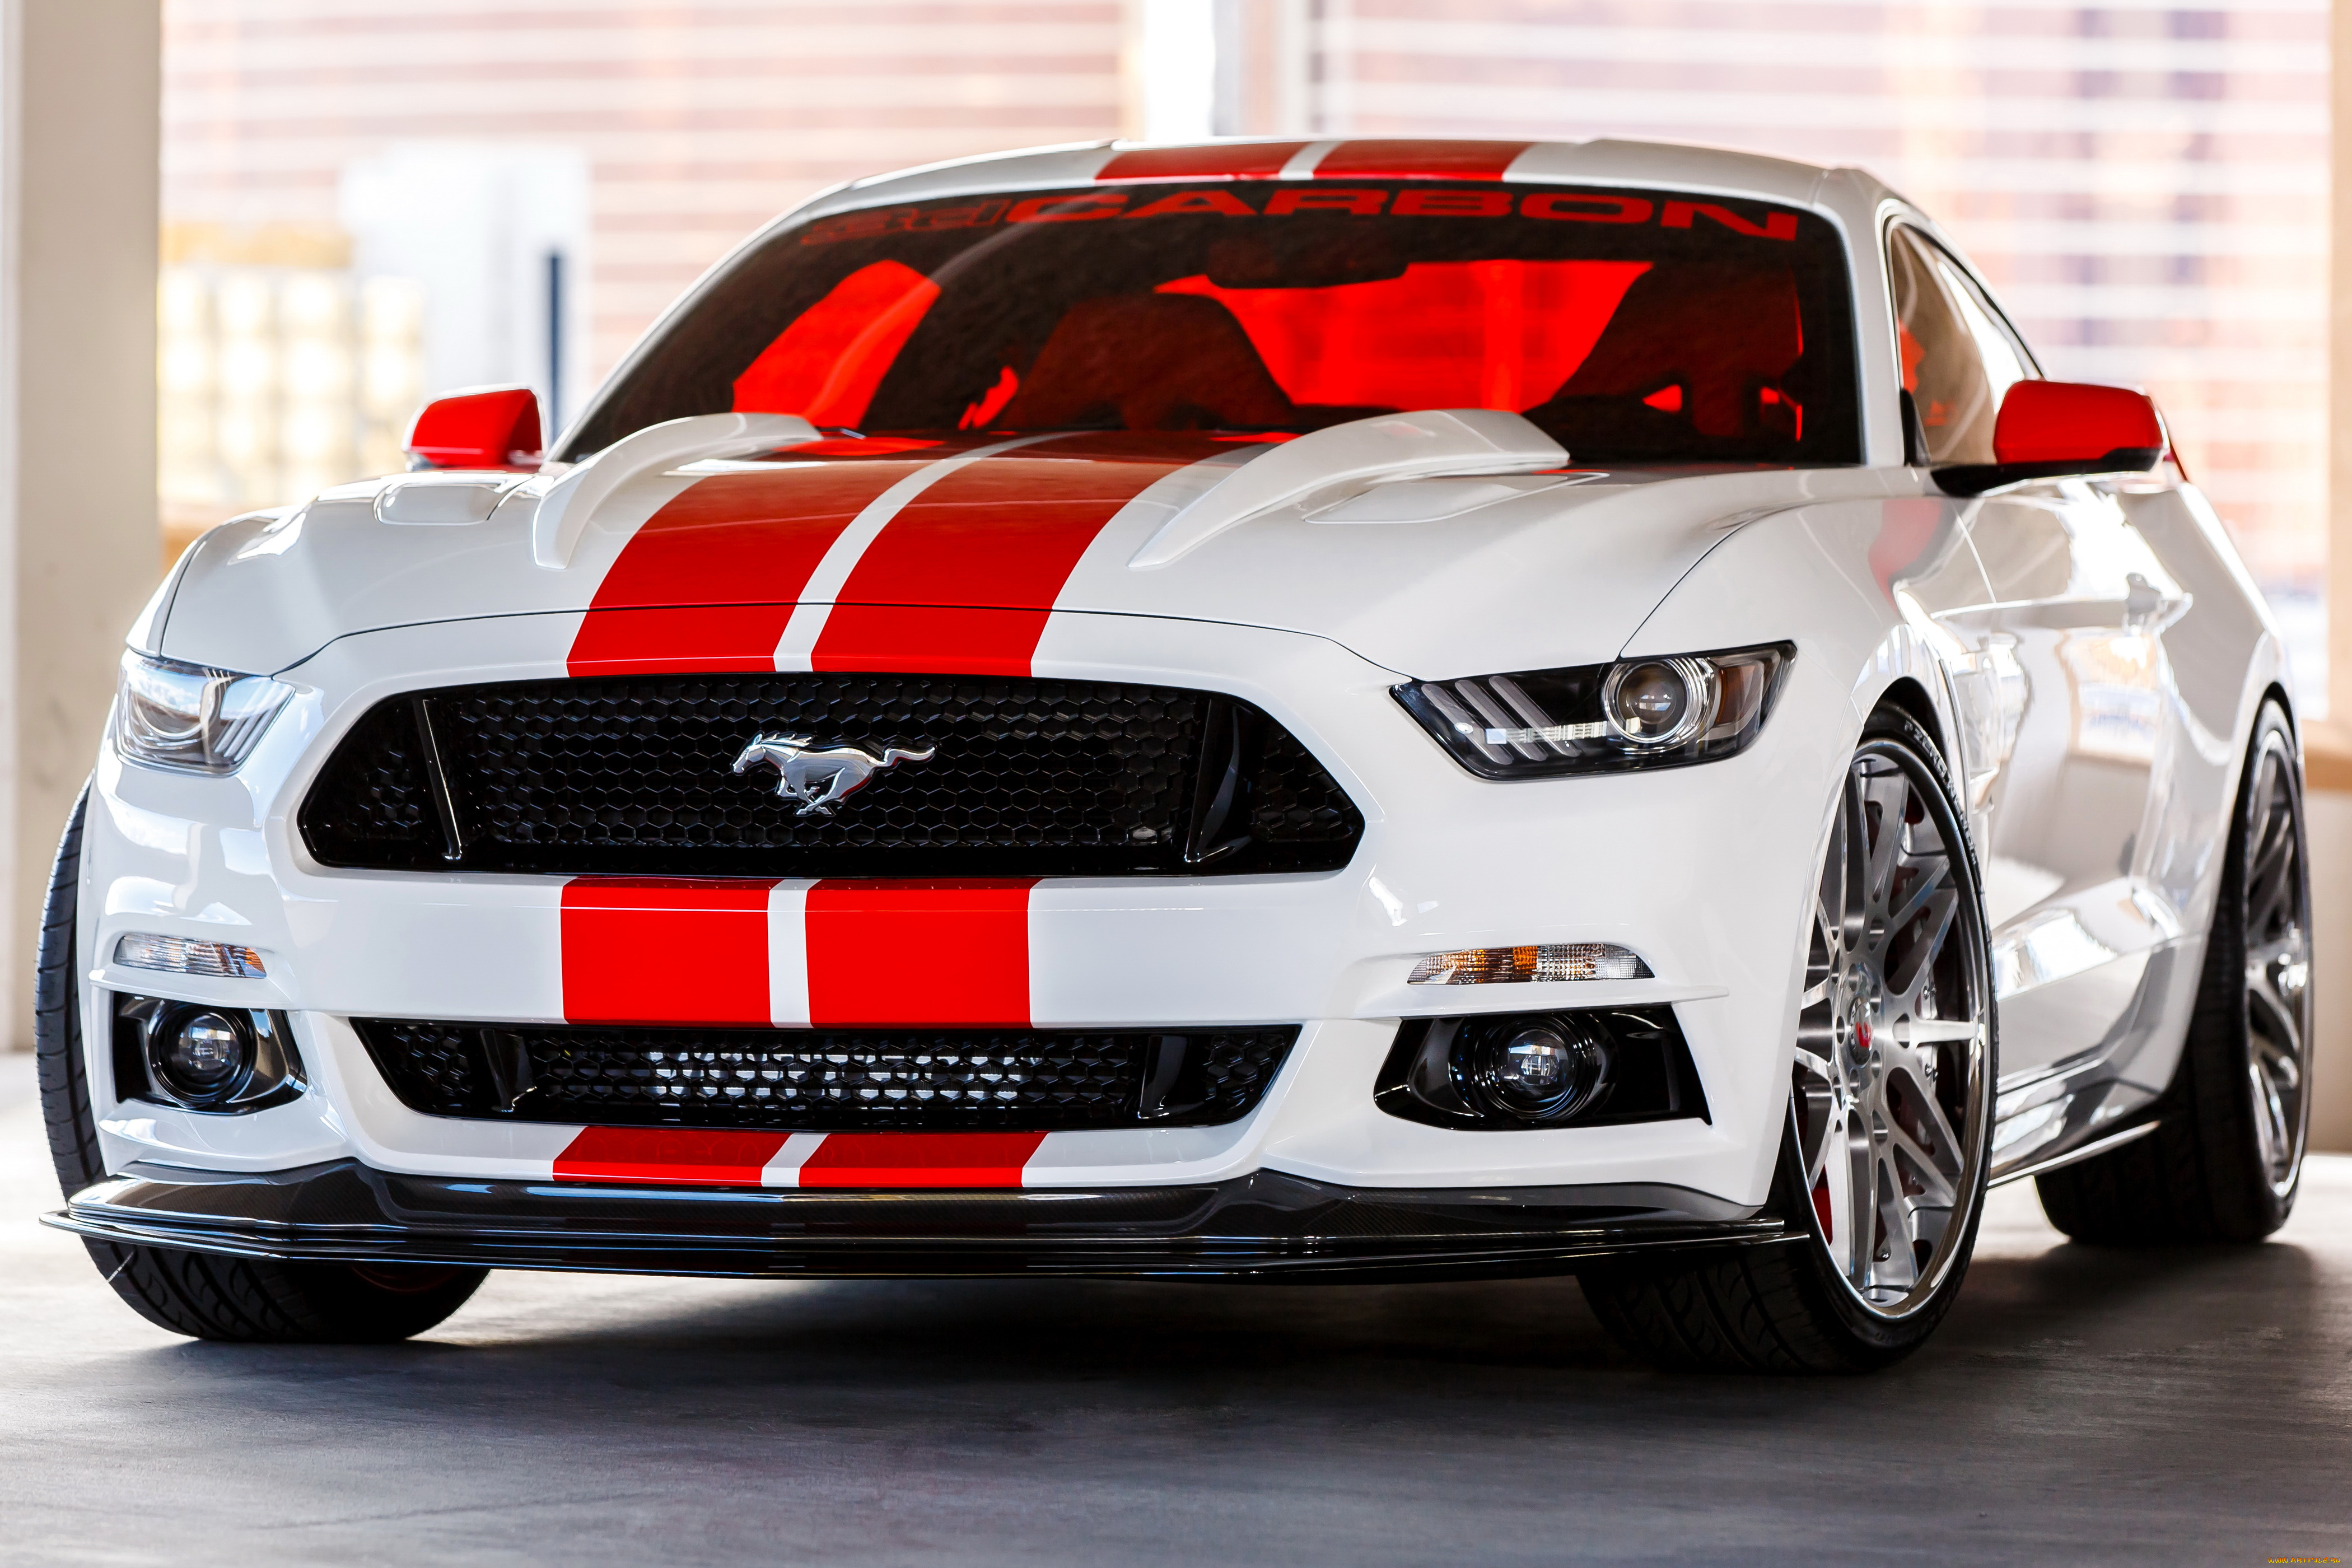 2014, ford, mustang, , carbon, автомобили, mustang, ford, тюнинг, металлик, белый